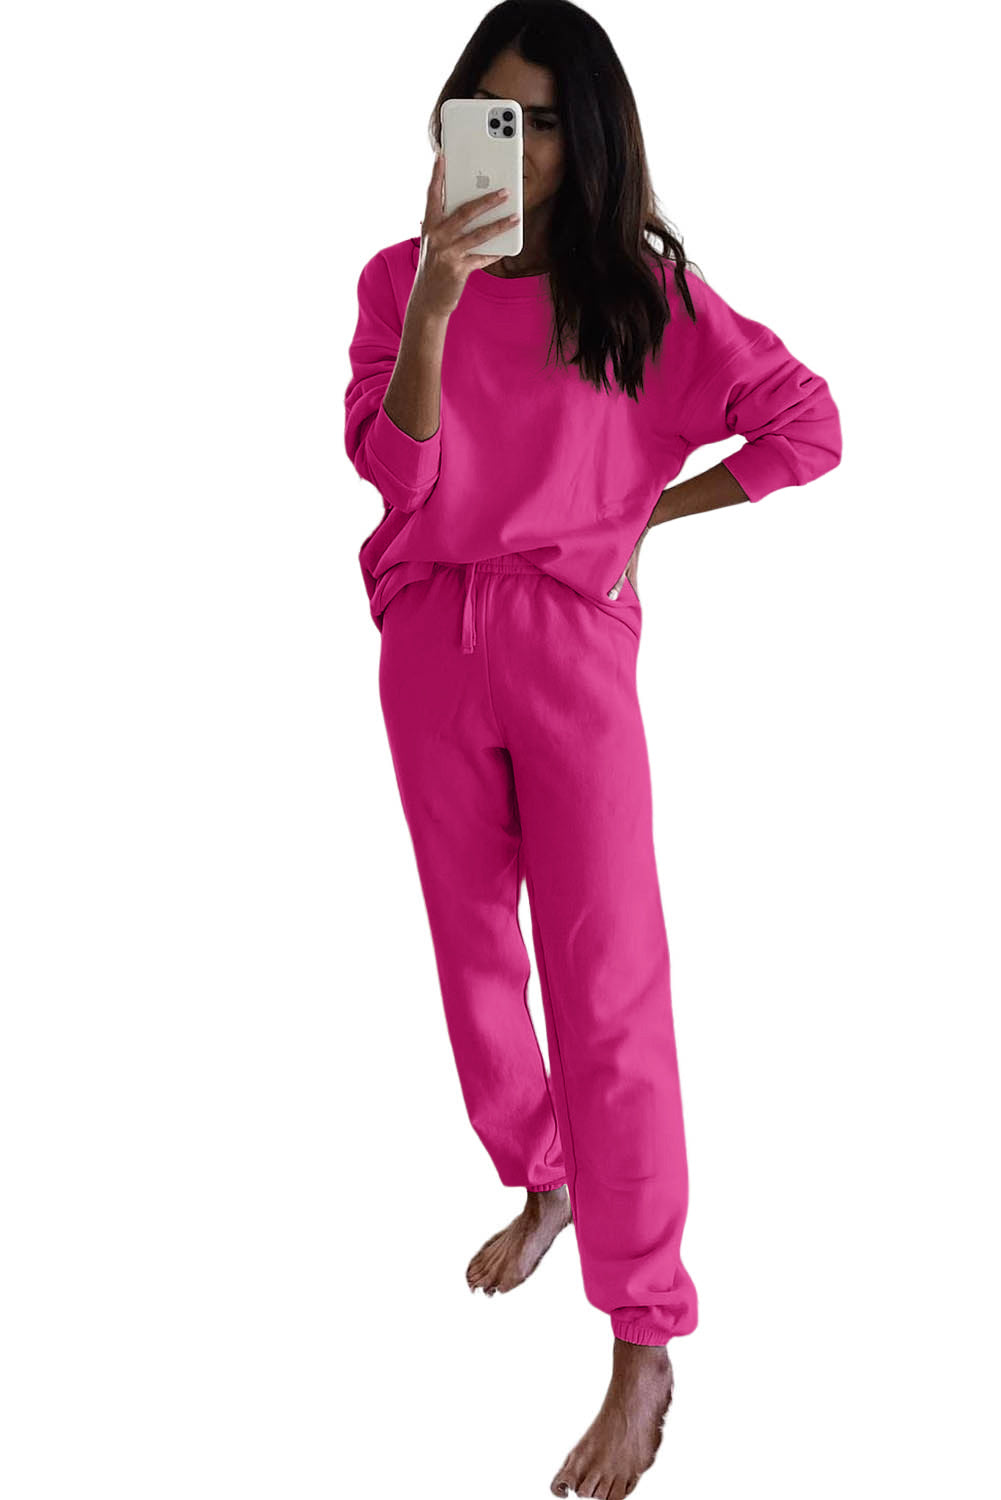 Rose Red Long Sleeve Top and Drawstring Pants Lounge Outfit Loungewear JT's Designer Fashion